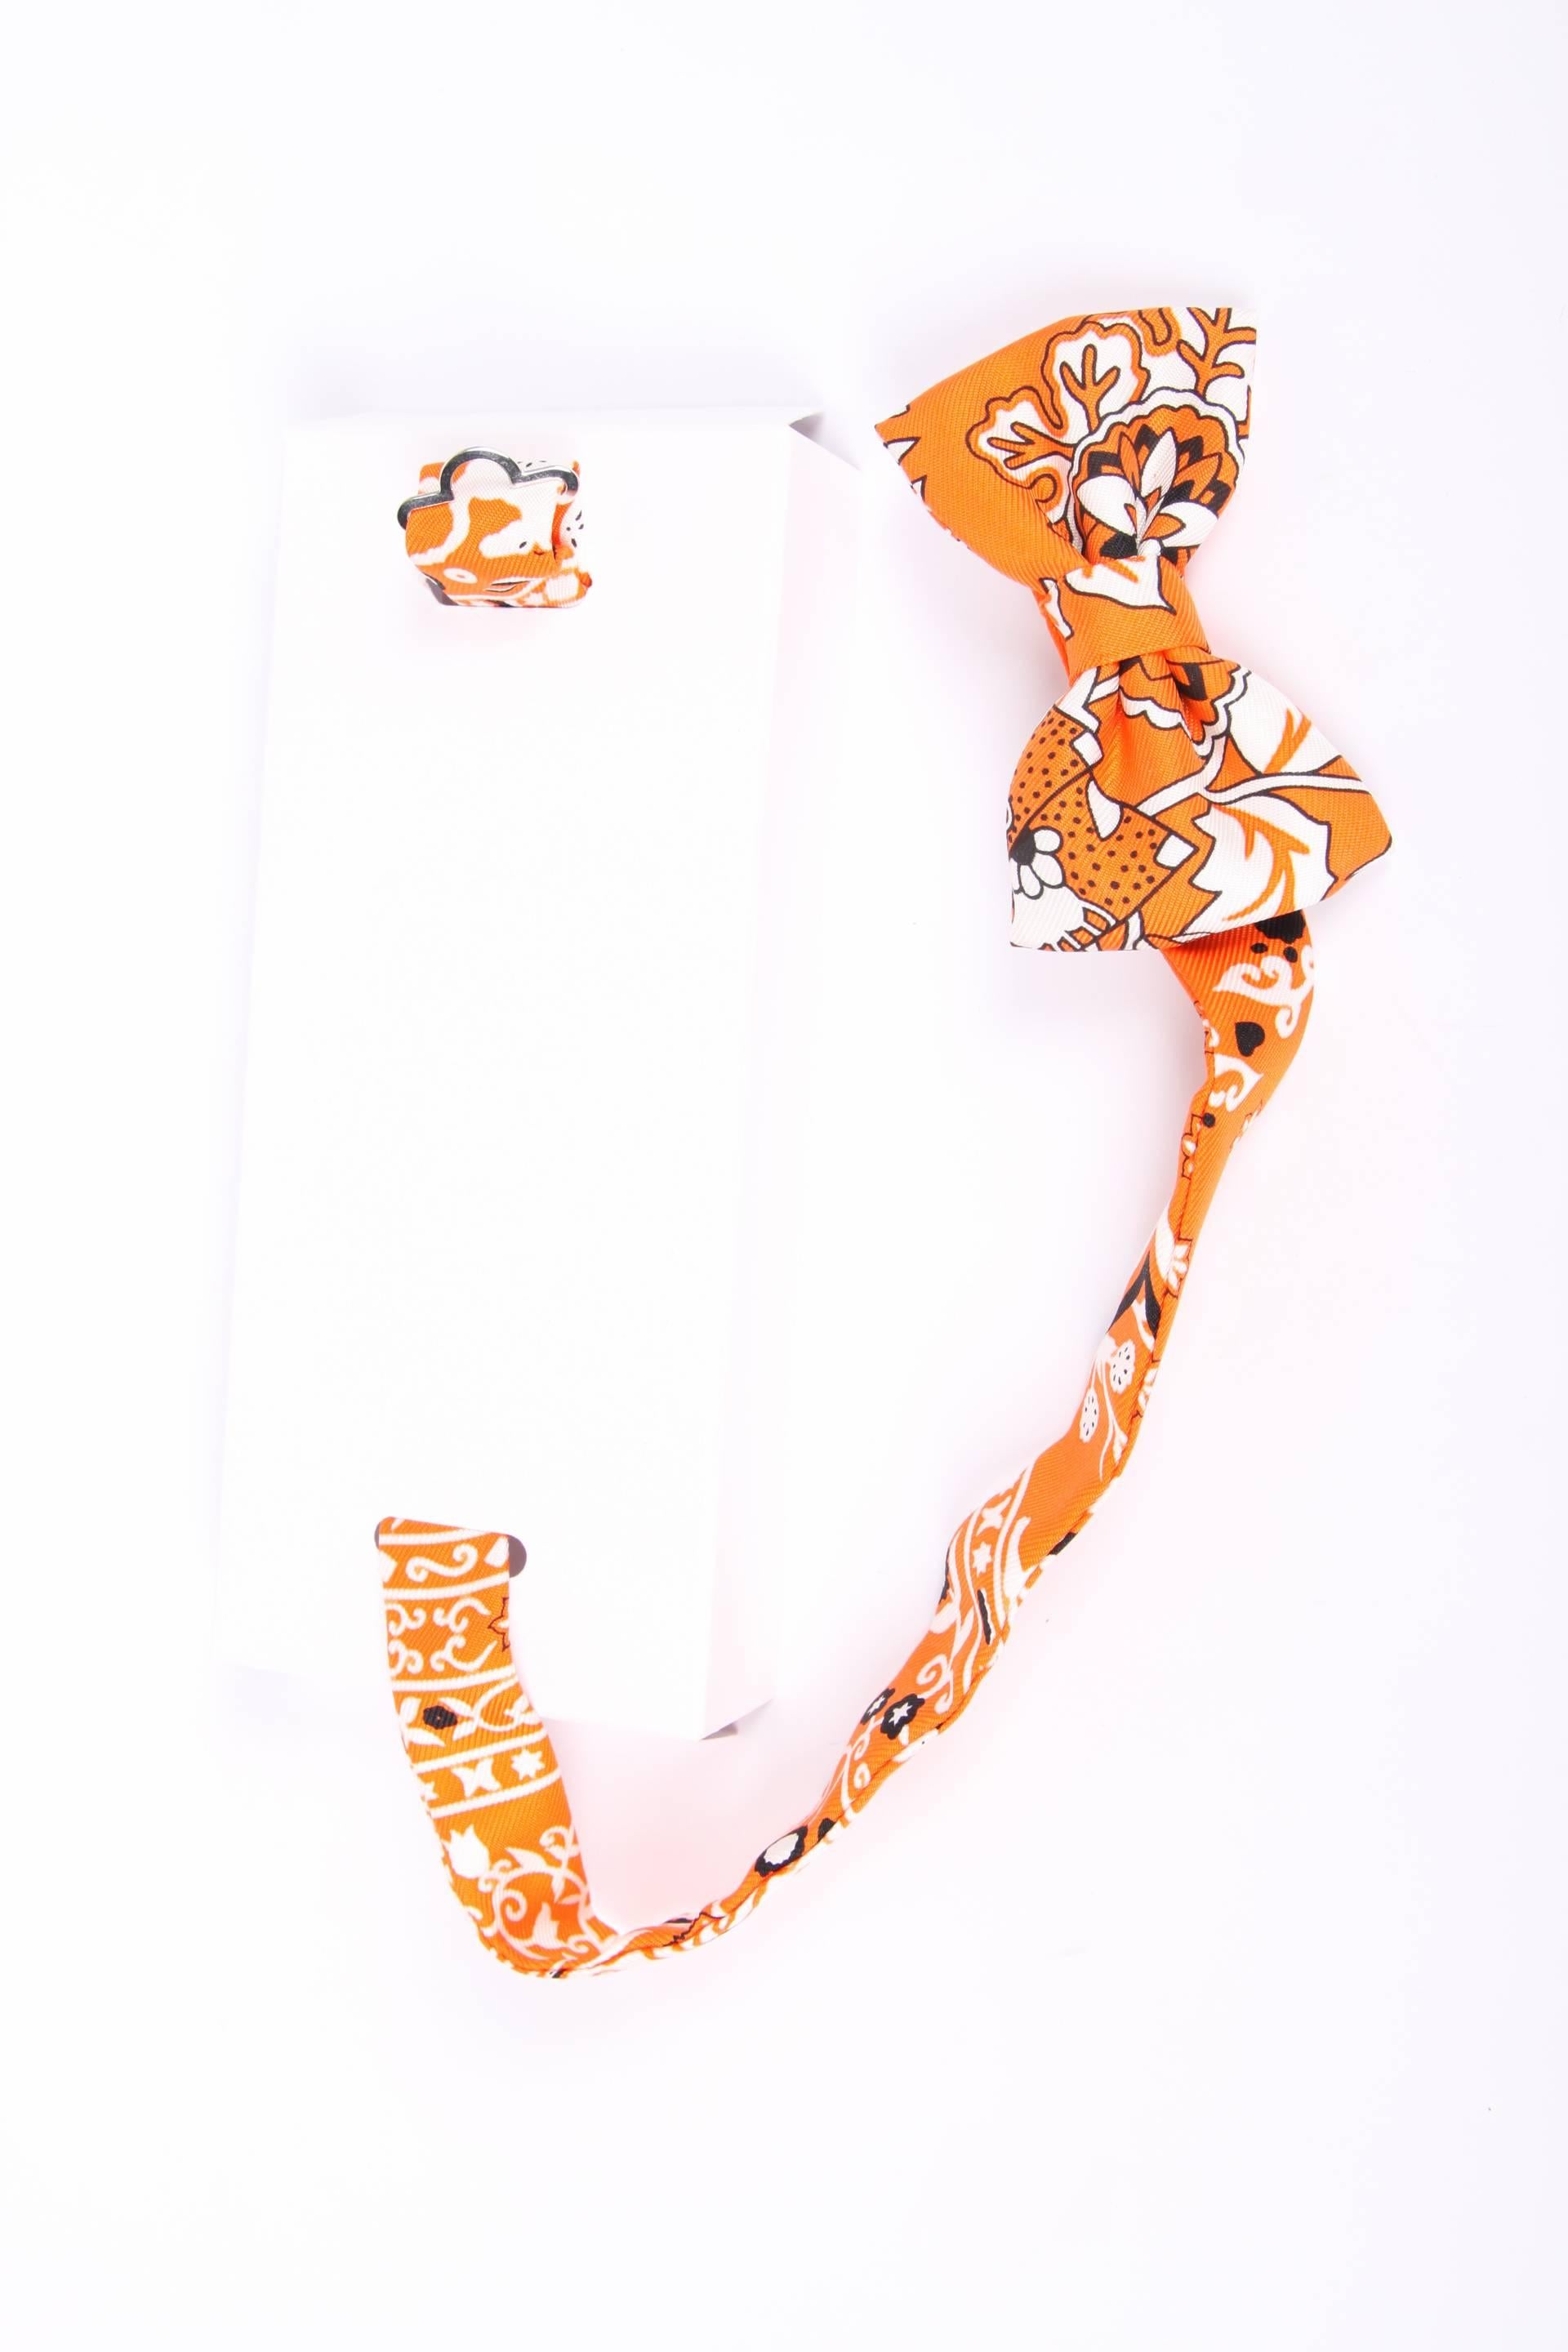 Special bow tie by Hermès in orange, black and white silk.

A real statement to wear with a white blouse, but this bow tie can also be worn around the wrist. Has an adjustable strap, one size fits all.

New and never been worn, comes with